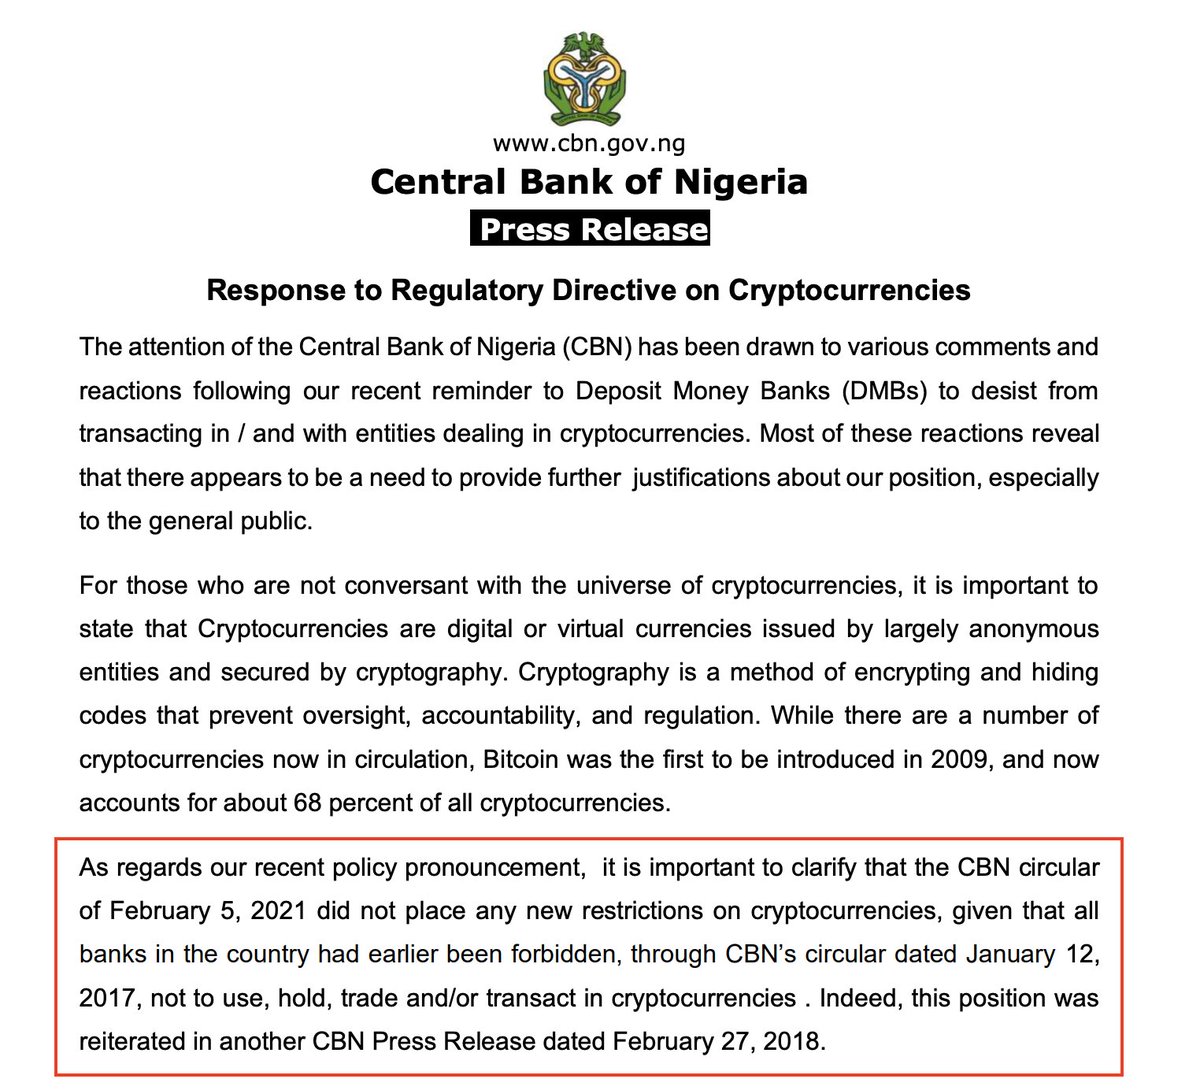 CBN in a press release last week as a response to the public reactions about its Feb 5 circular banning "the facilitation of payments for crypto exchanges" said that "the CBN circularof February 5, 2021 did not place any new restrictions on cryptocurrencies".